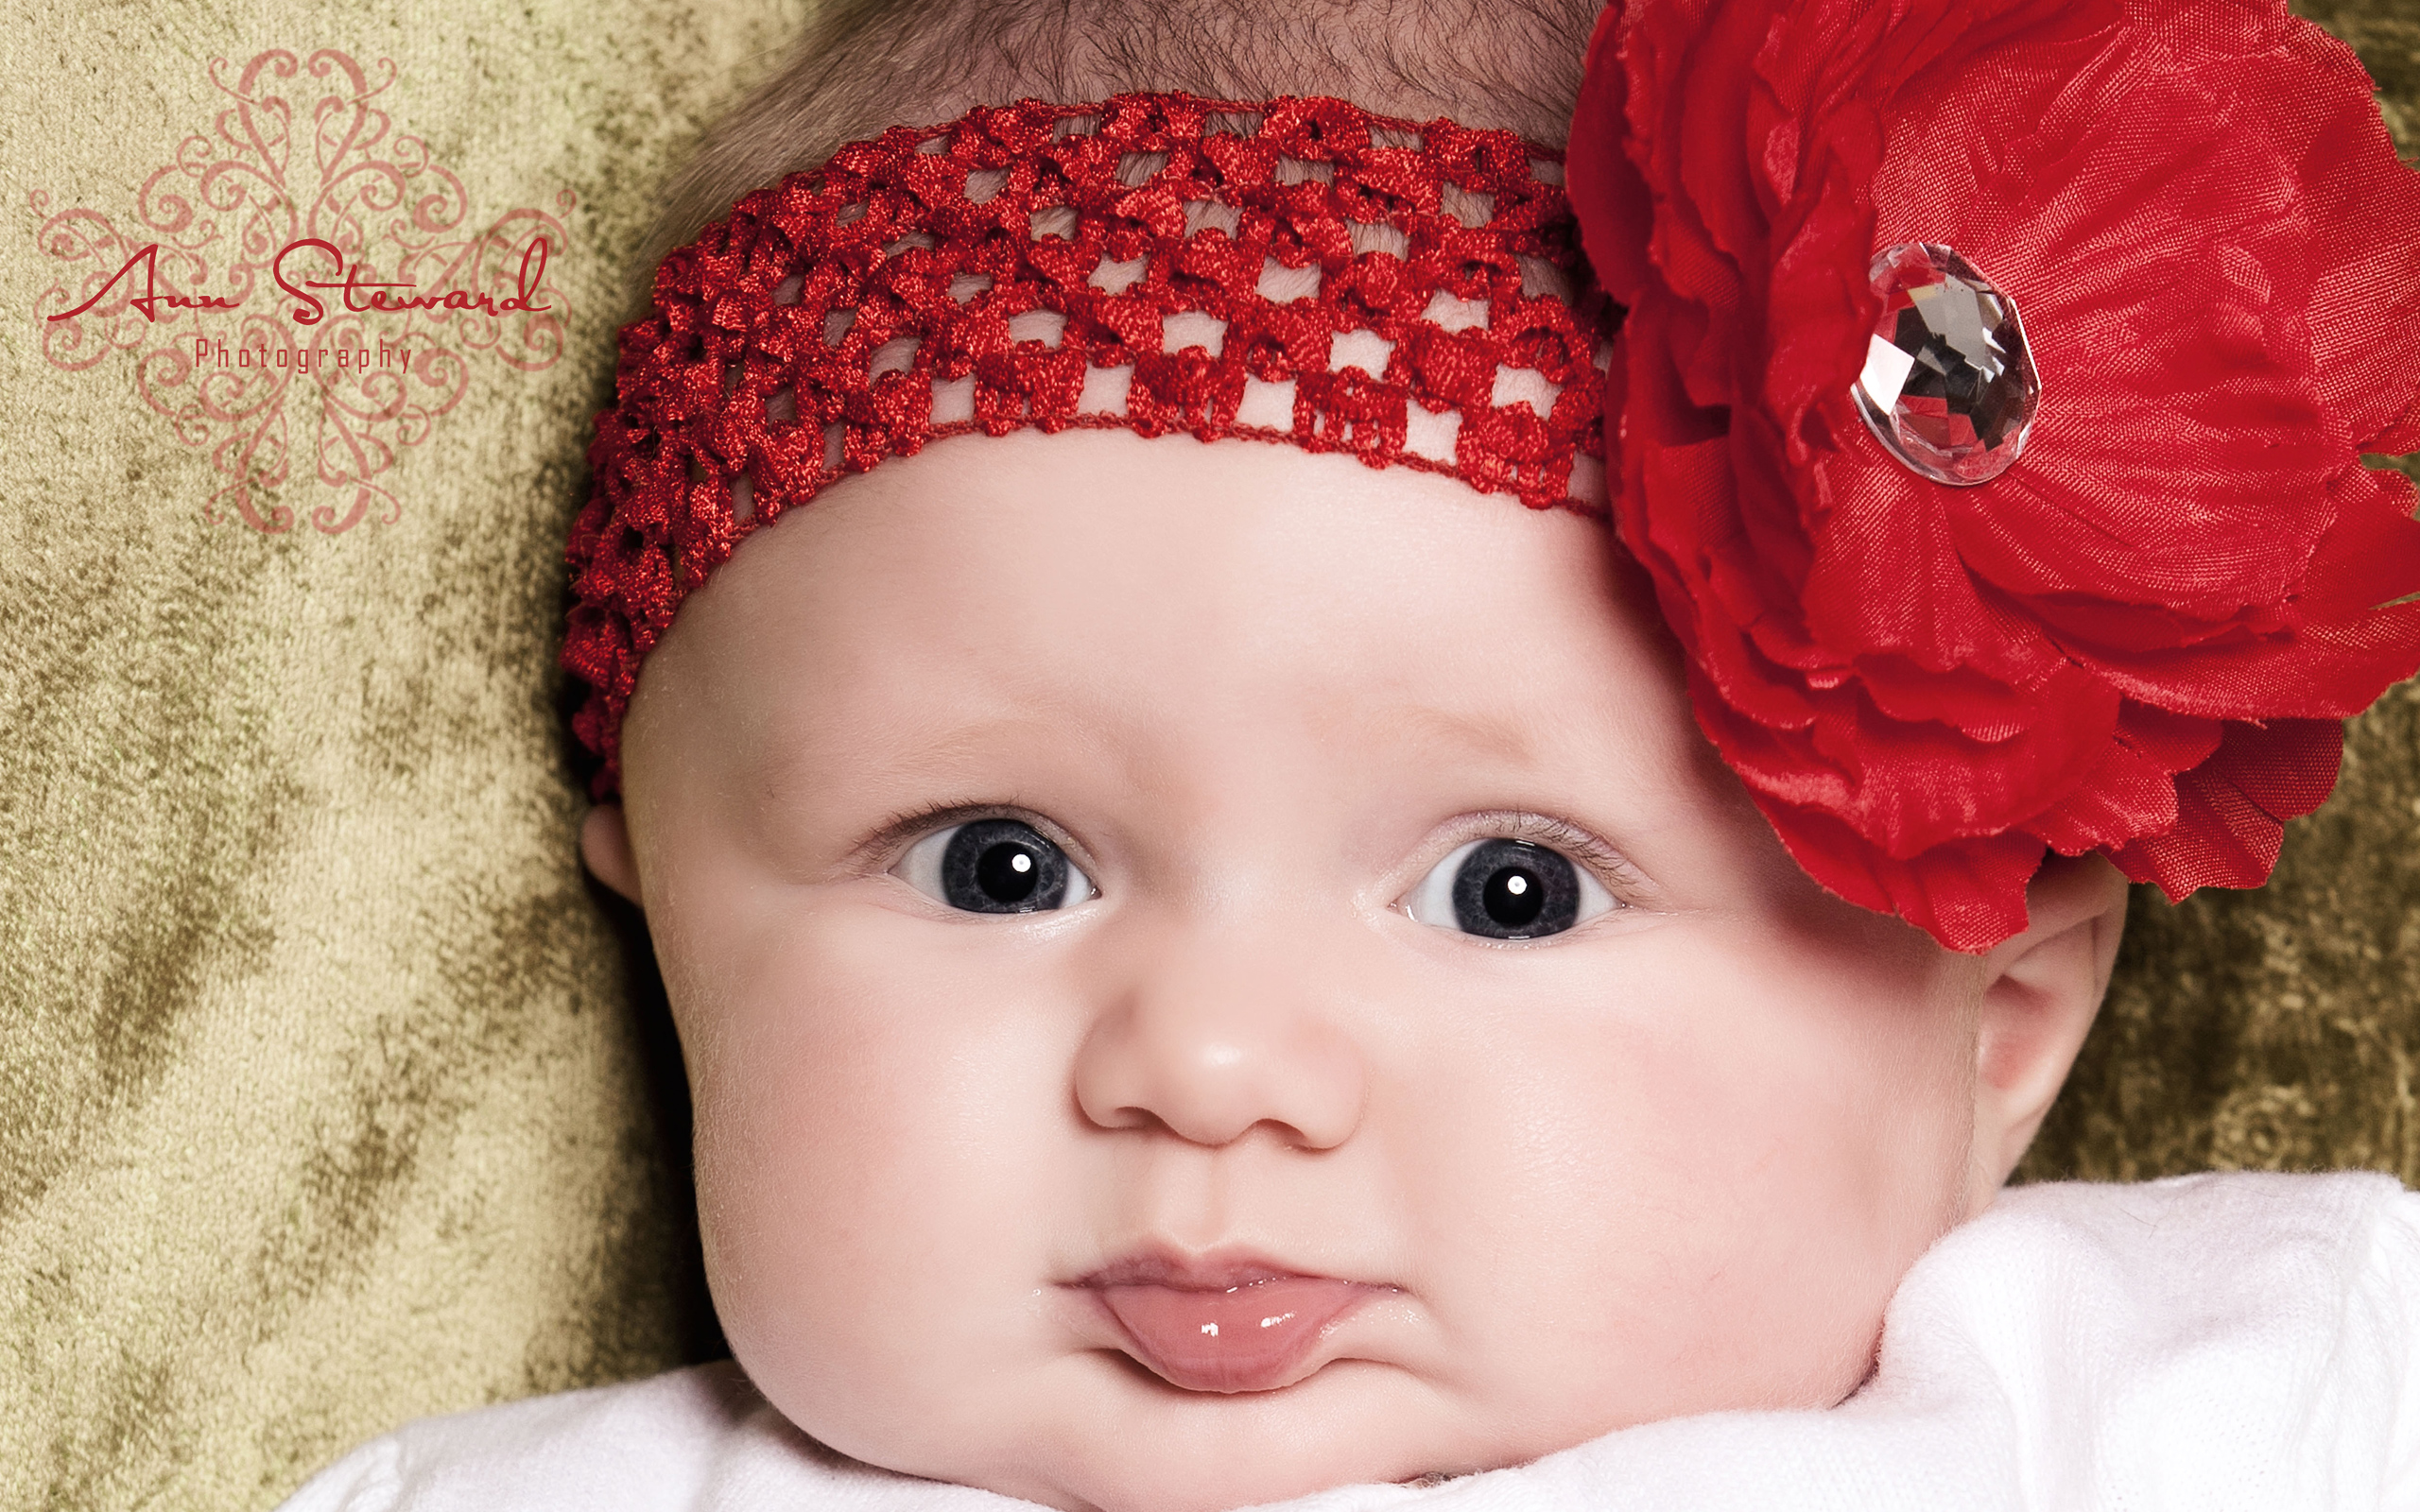 Super Cute Little Baby Wallpapers | Wallpapers HD